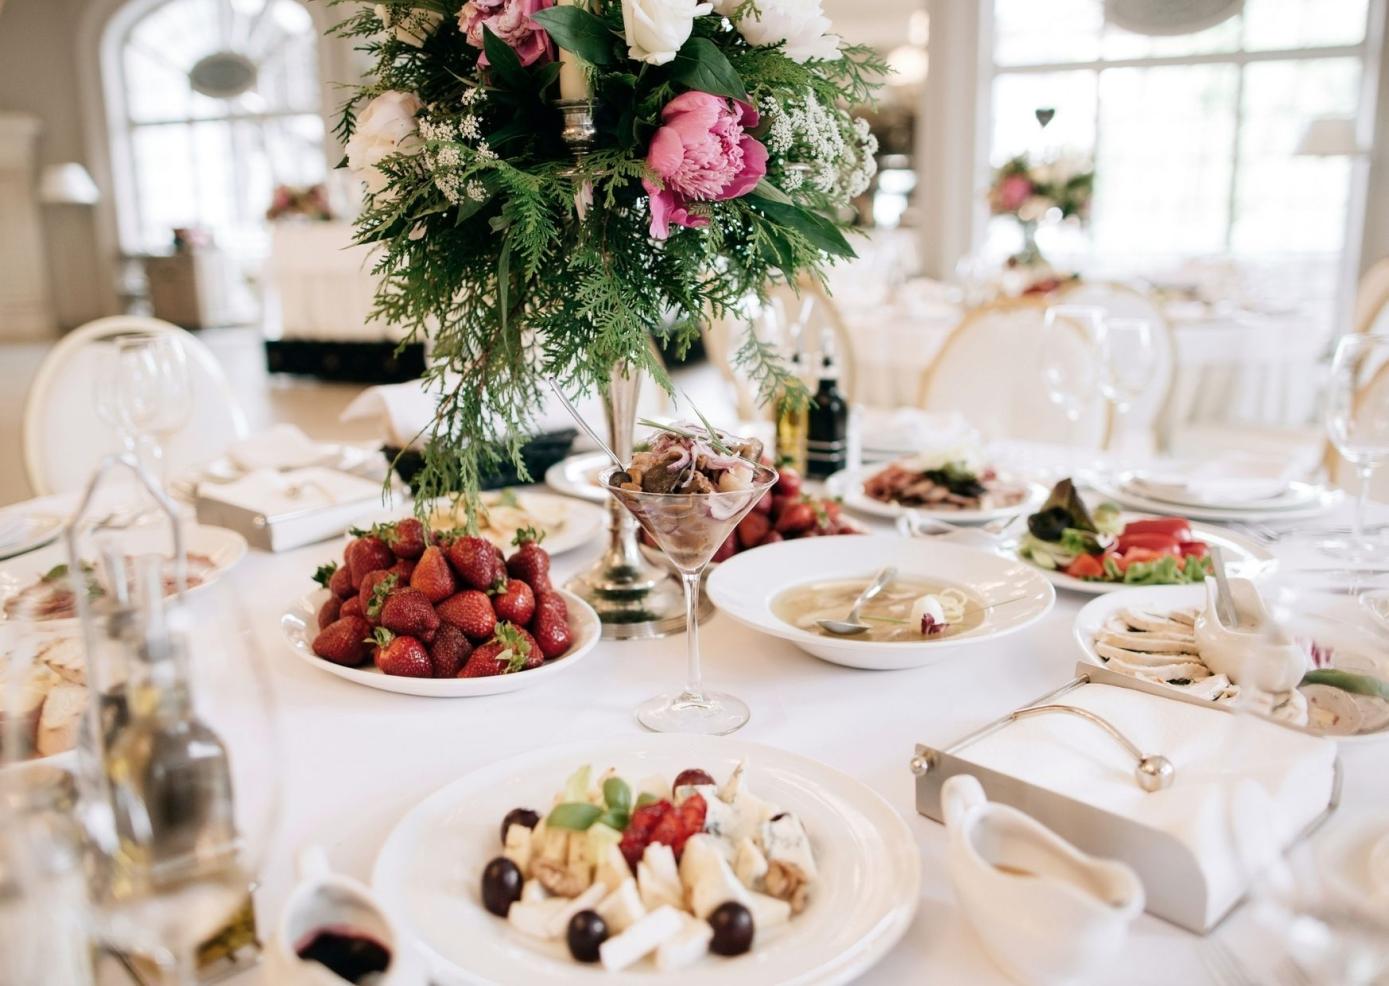 What Are Some Tips for Planning a Wedding Menu?